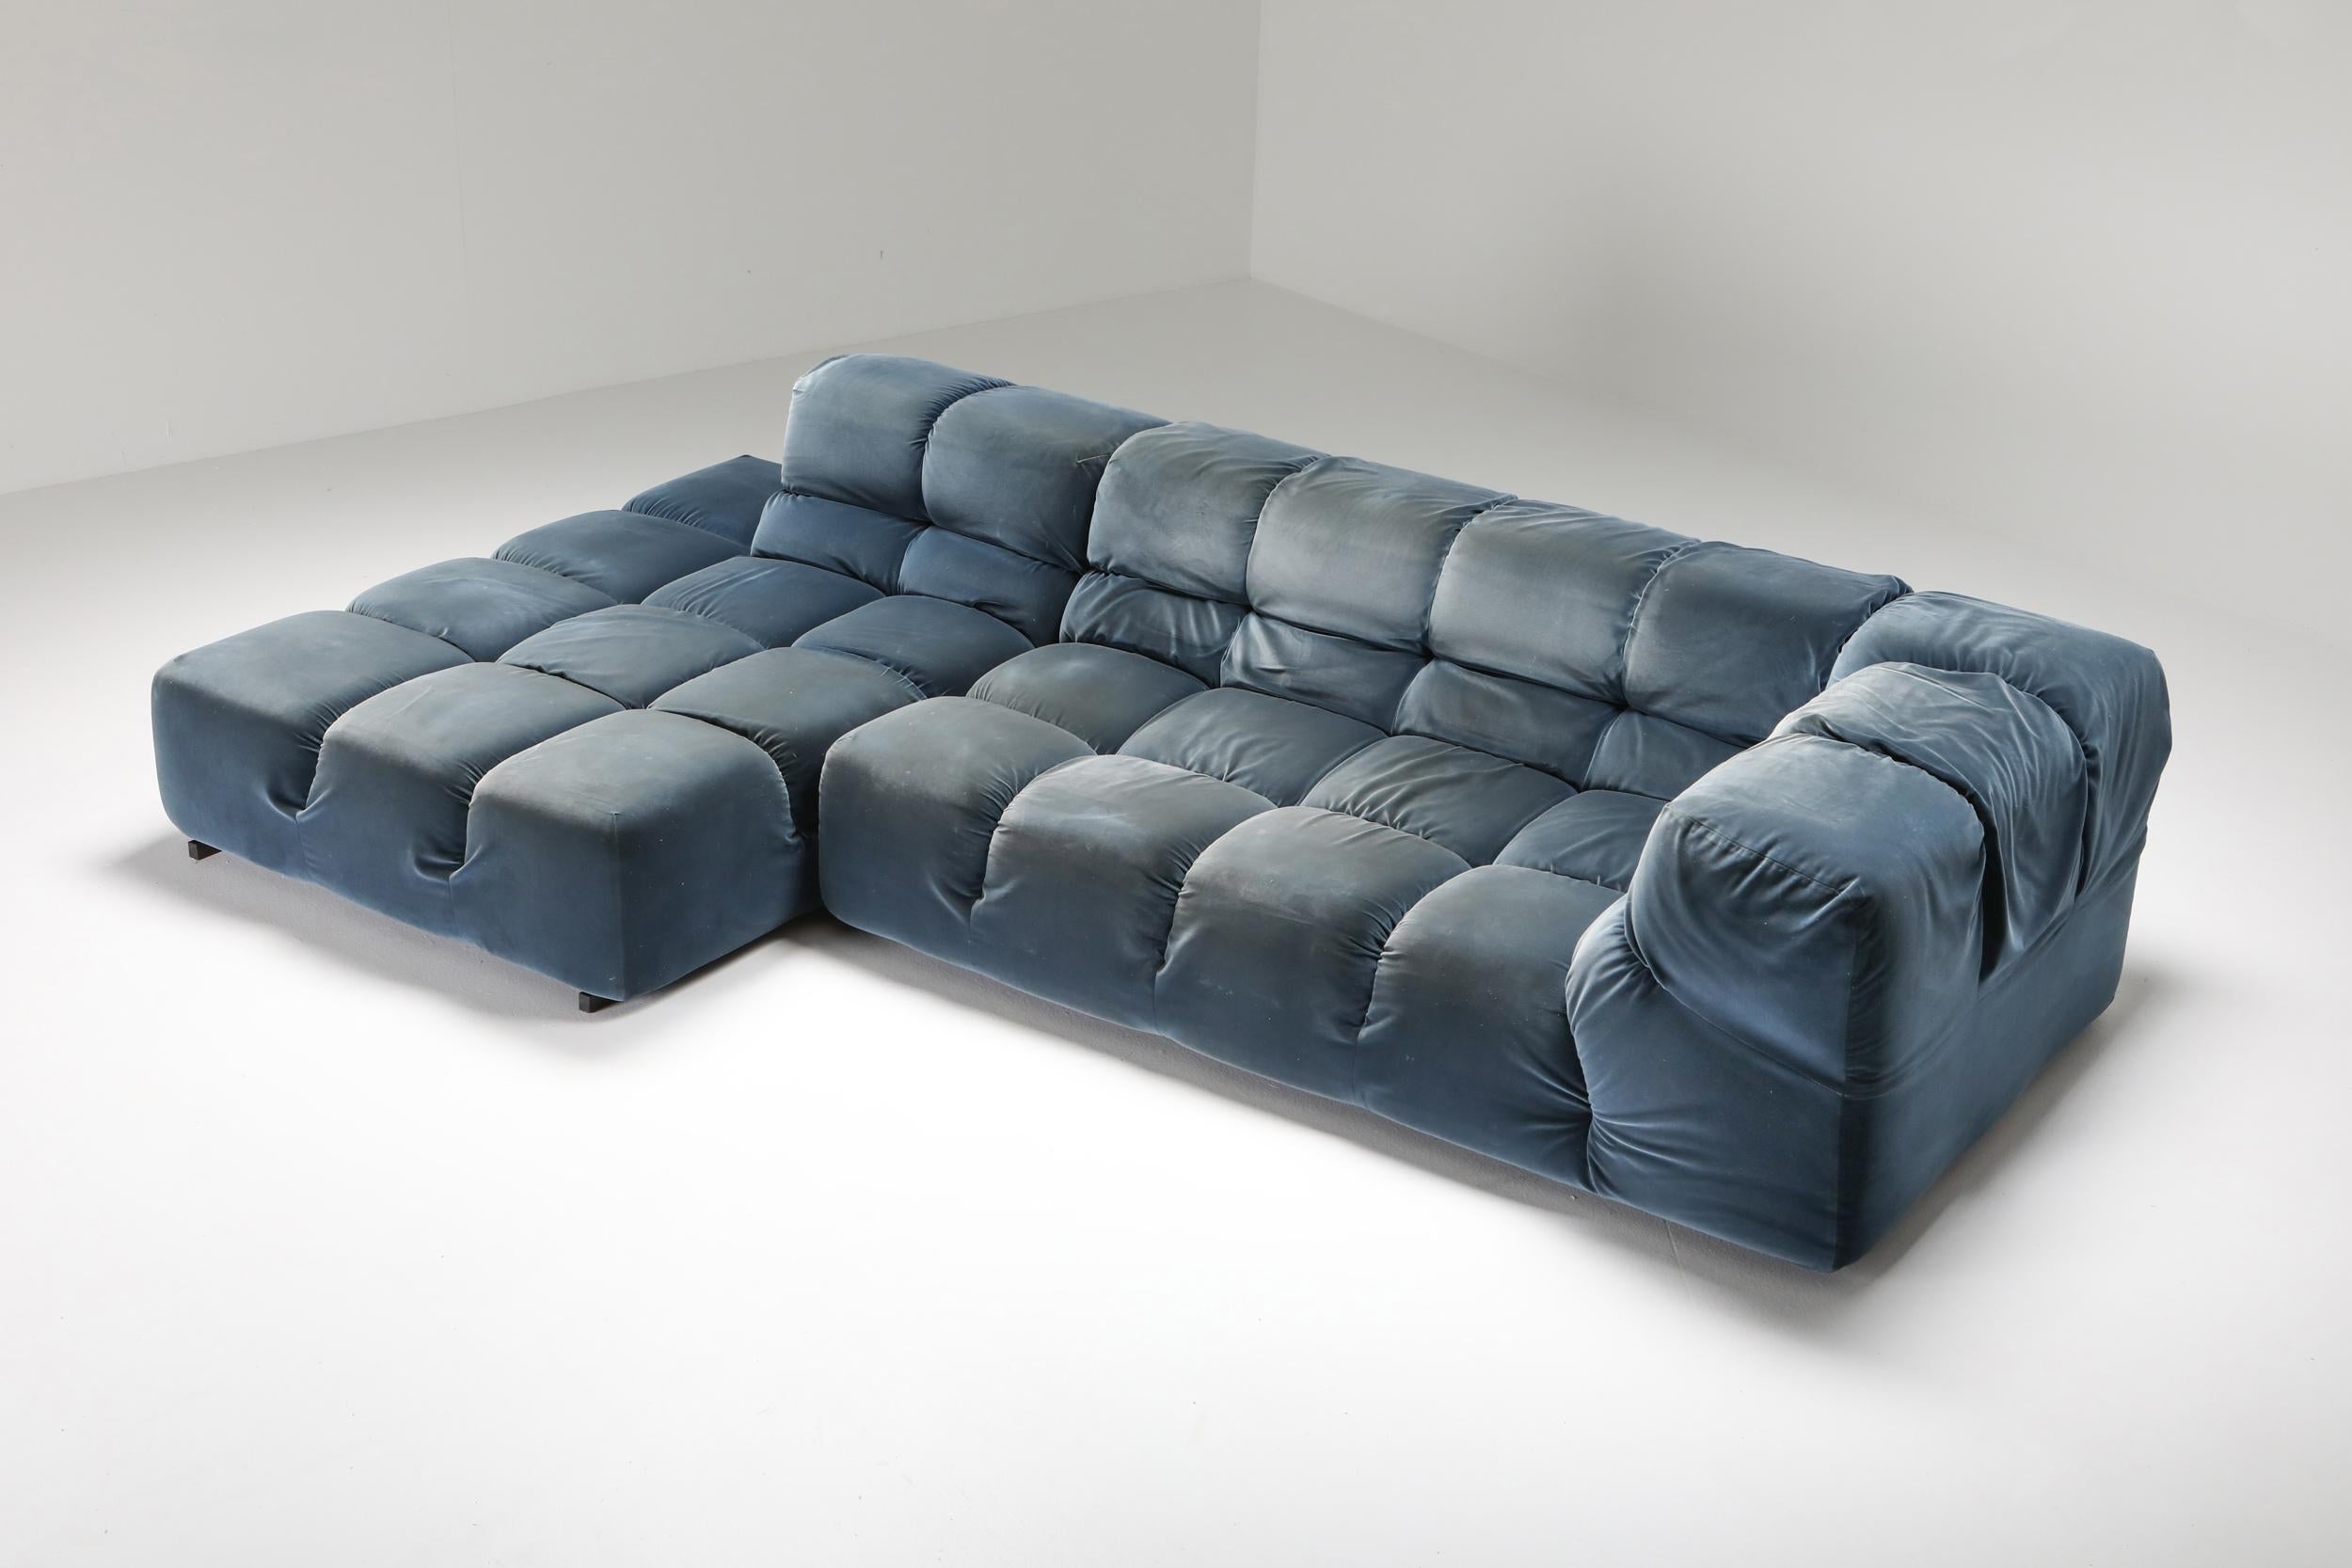 Tufty-time sectional sofa, Patricia Urquiola, B&B Italia, 2000s

It was 2005 and the designer said: “I wanted to revisit capitonnè and Chesterfield types of sofas, while paying special attention to the new interpretations made in the 1960s and